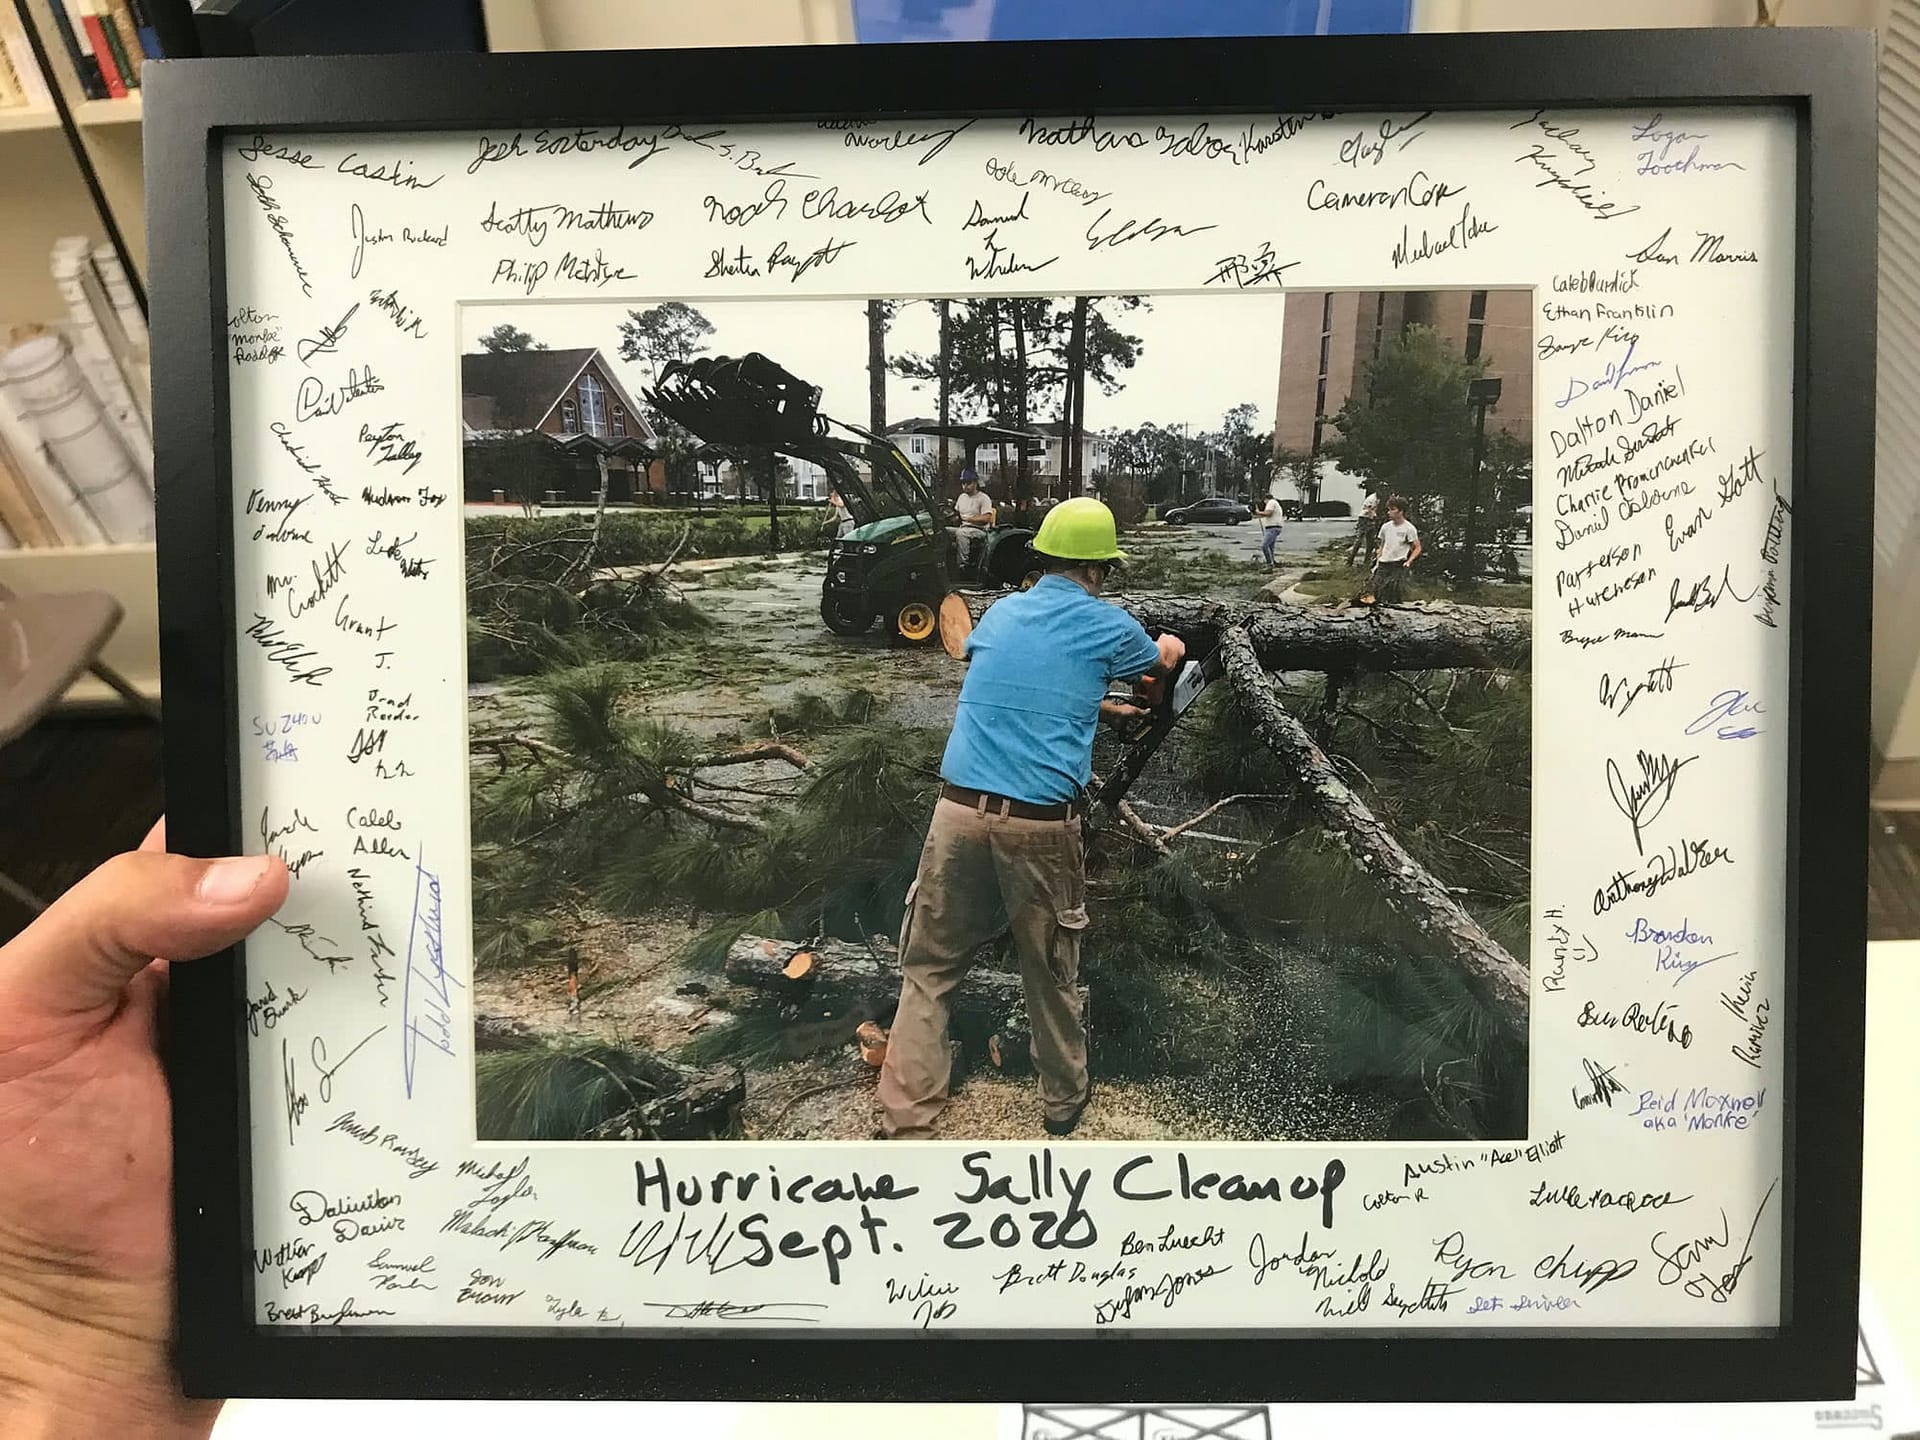 The grounds team has a signed image of clean up efforts as a memento